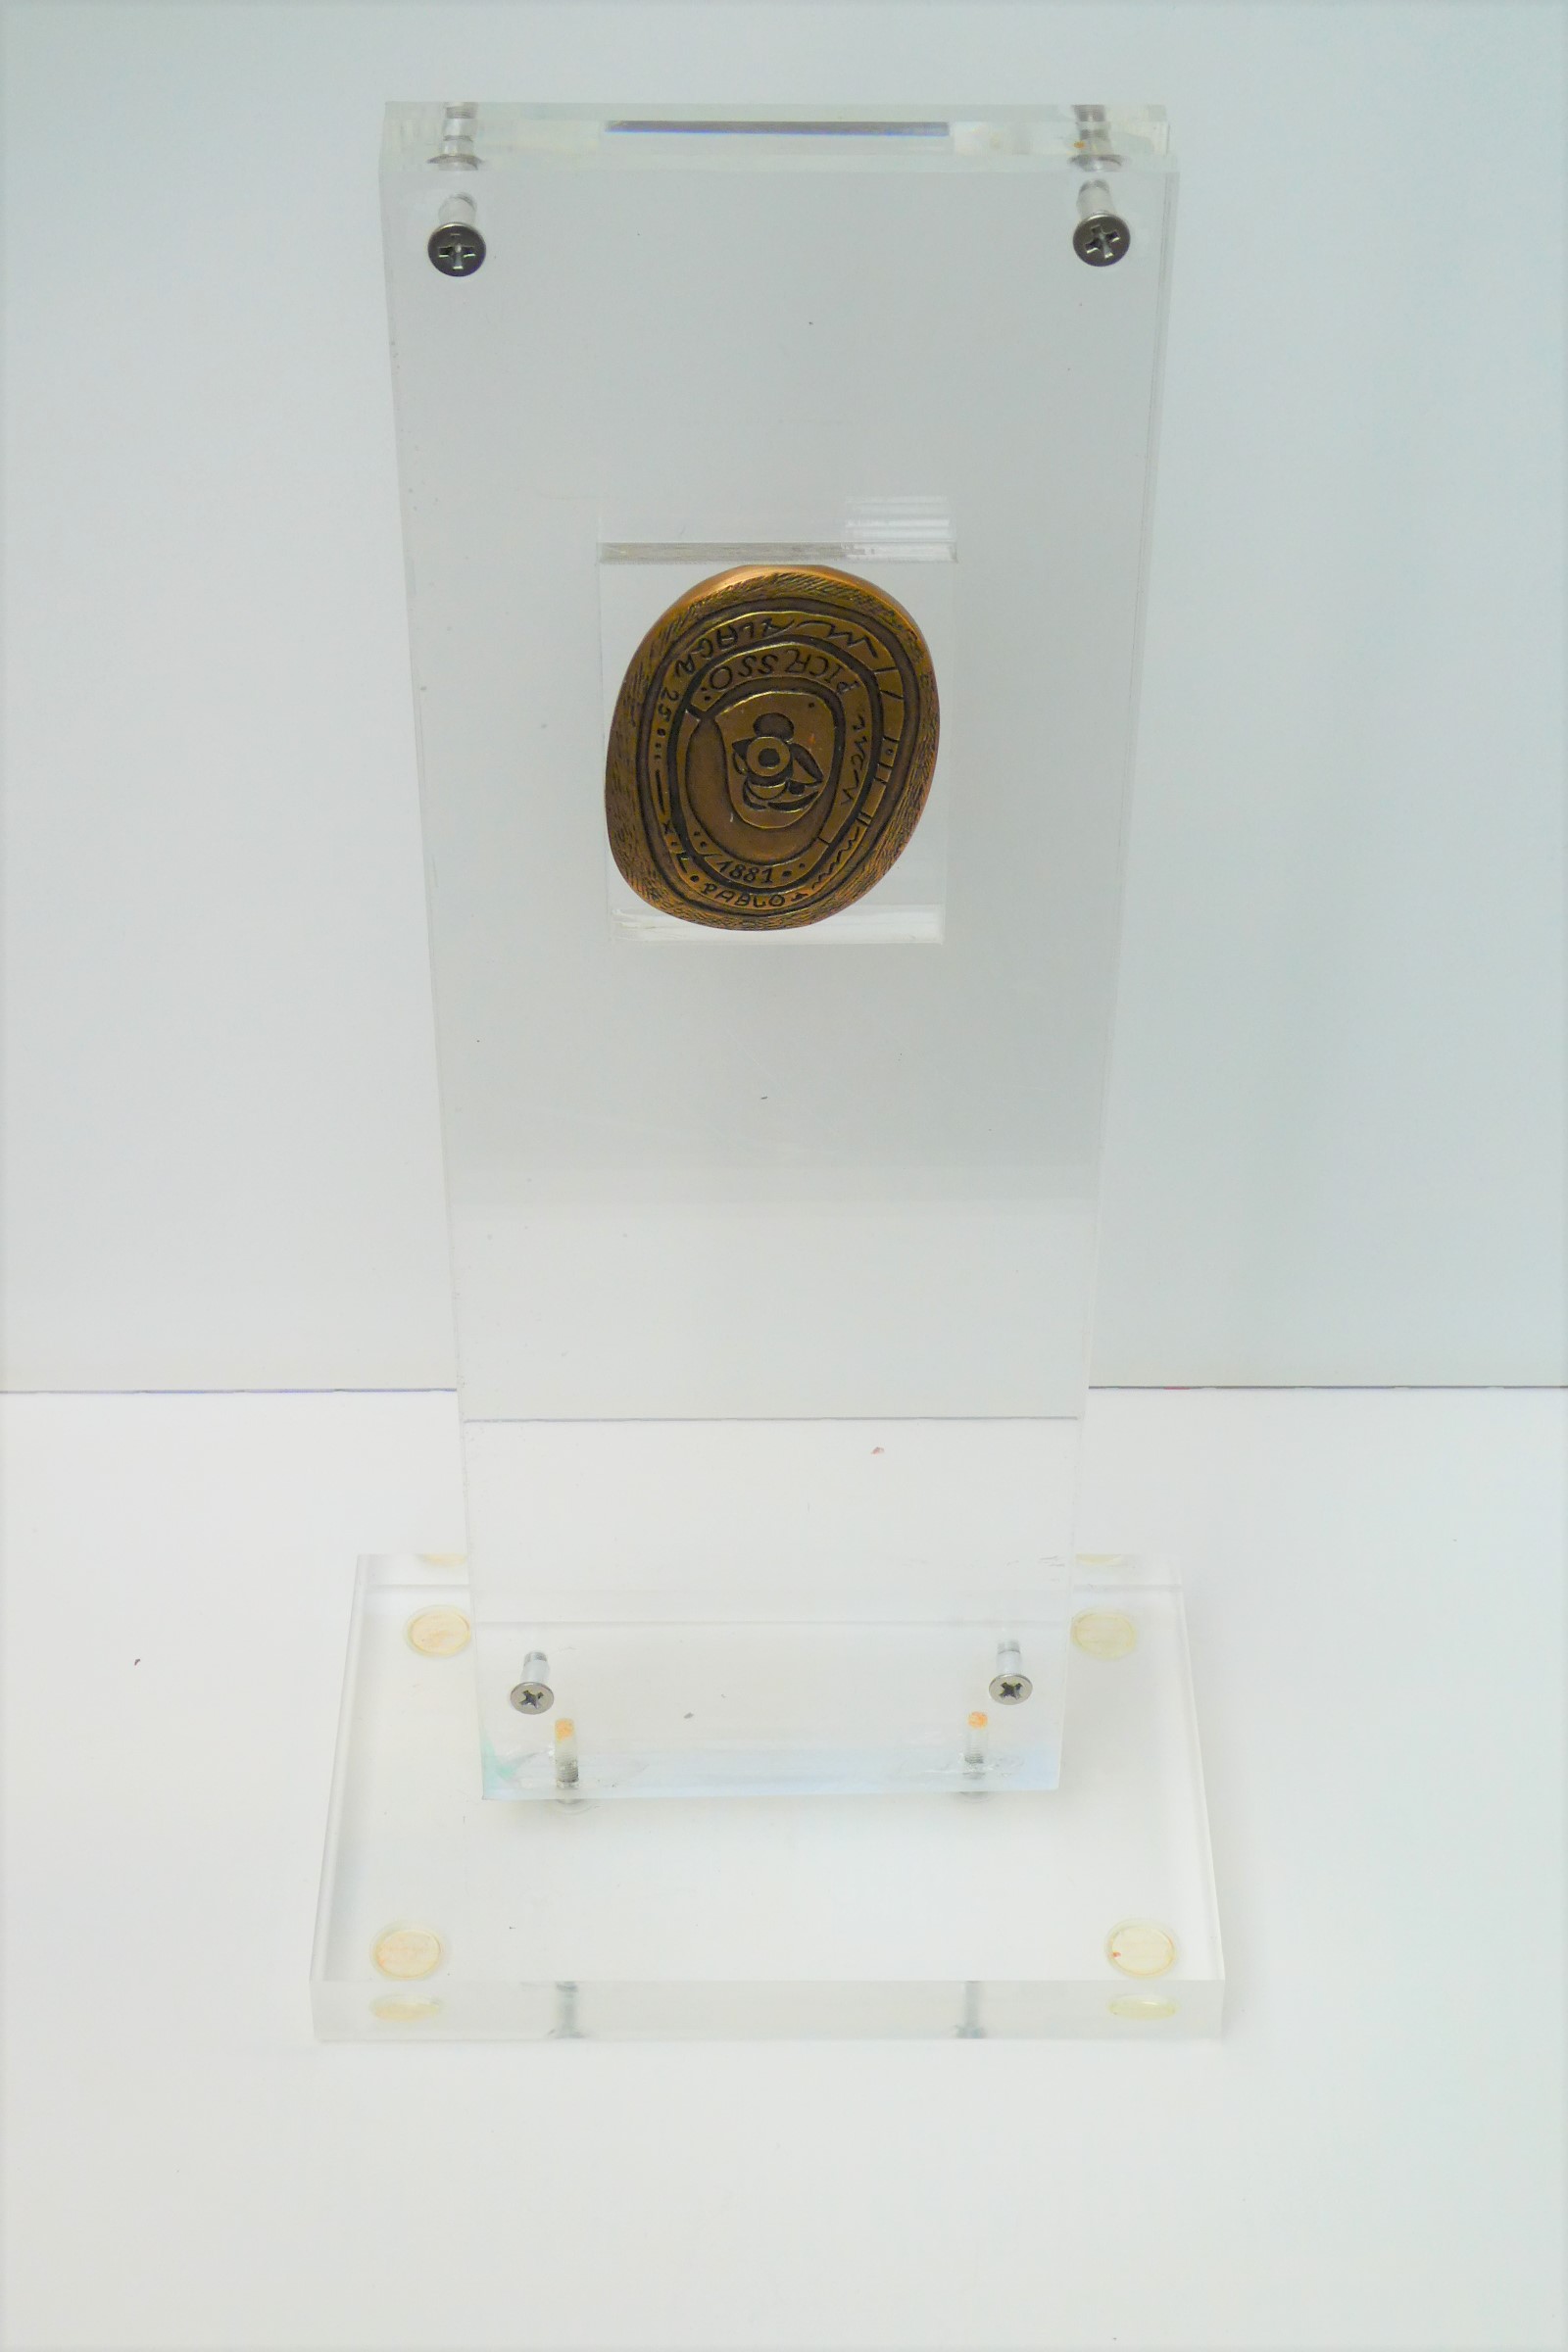 Commemorative medal made on the occasion of Pablo Picasso's birthday 1